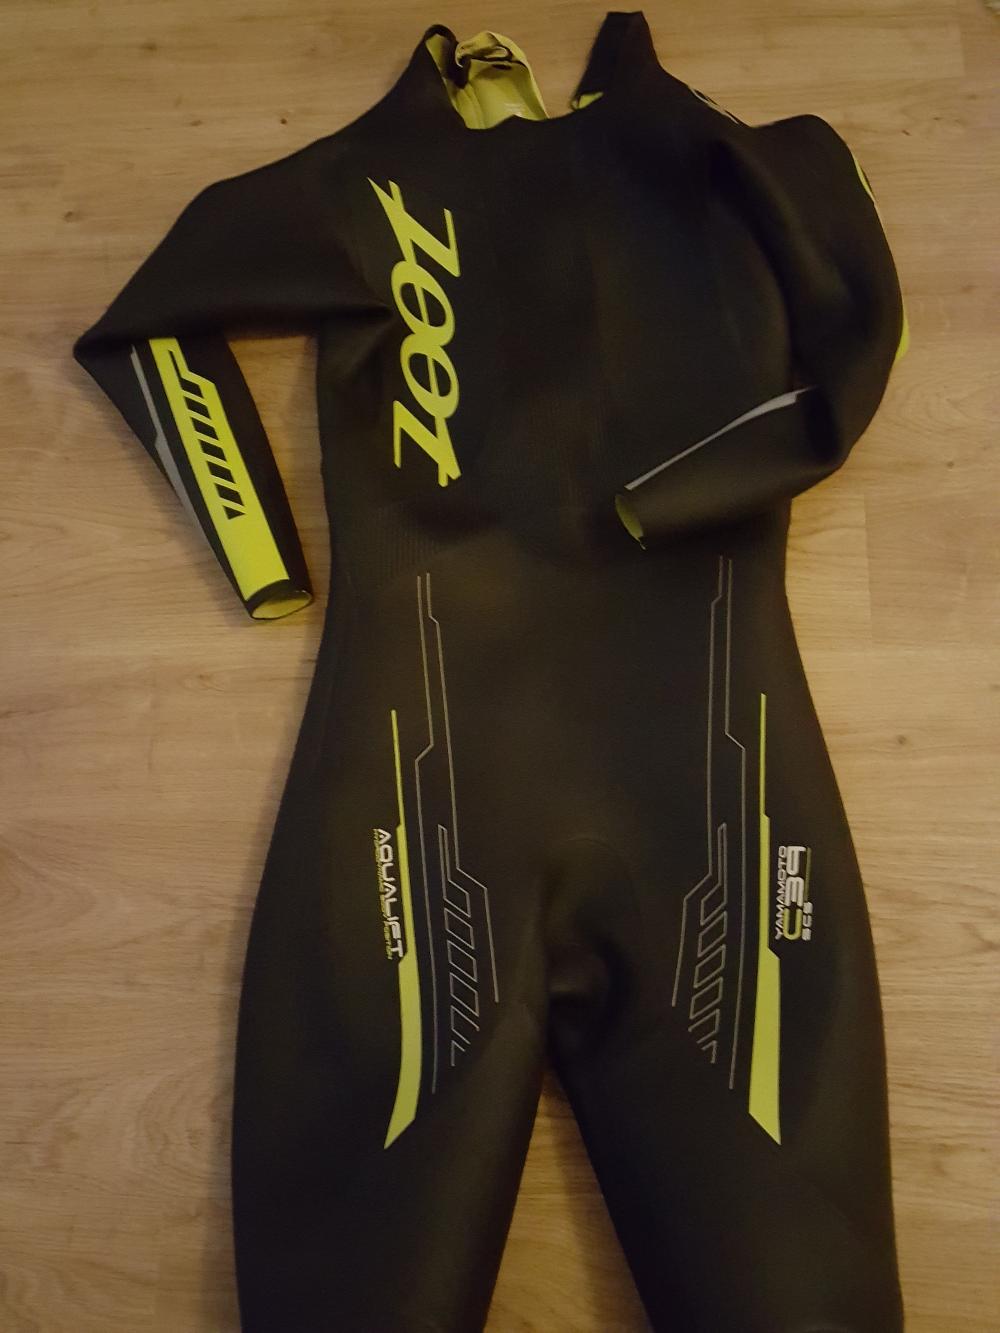 A sea swimming wetsuit is a must have piece of kit when swimming in open water